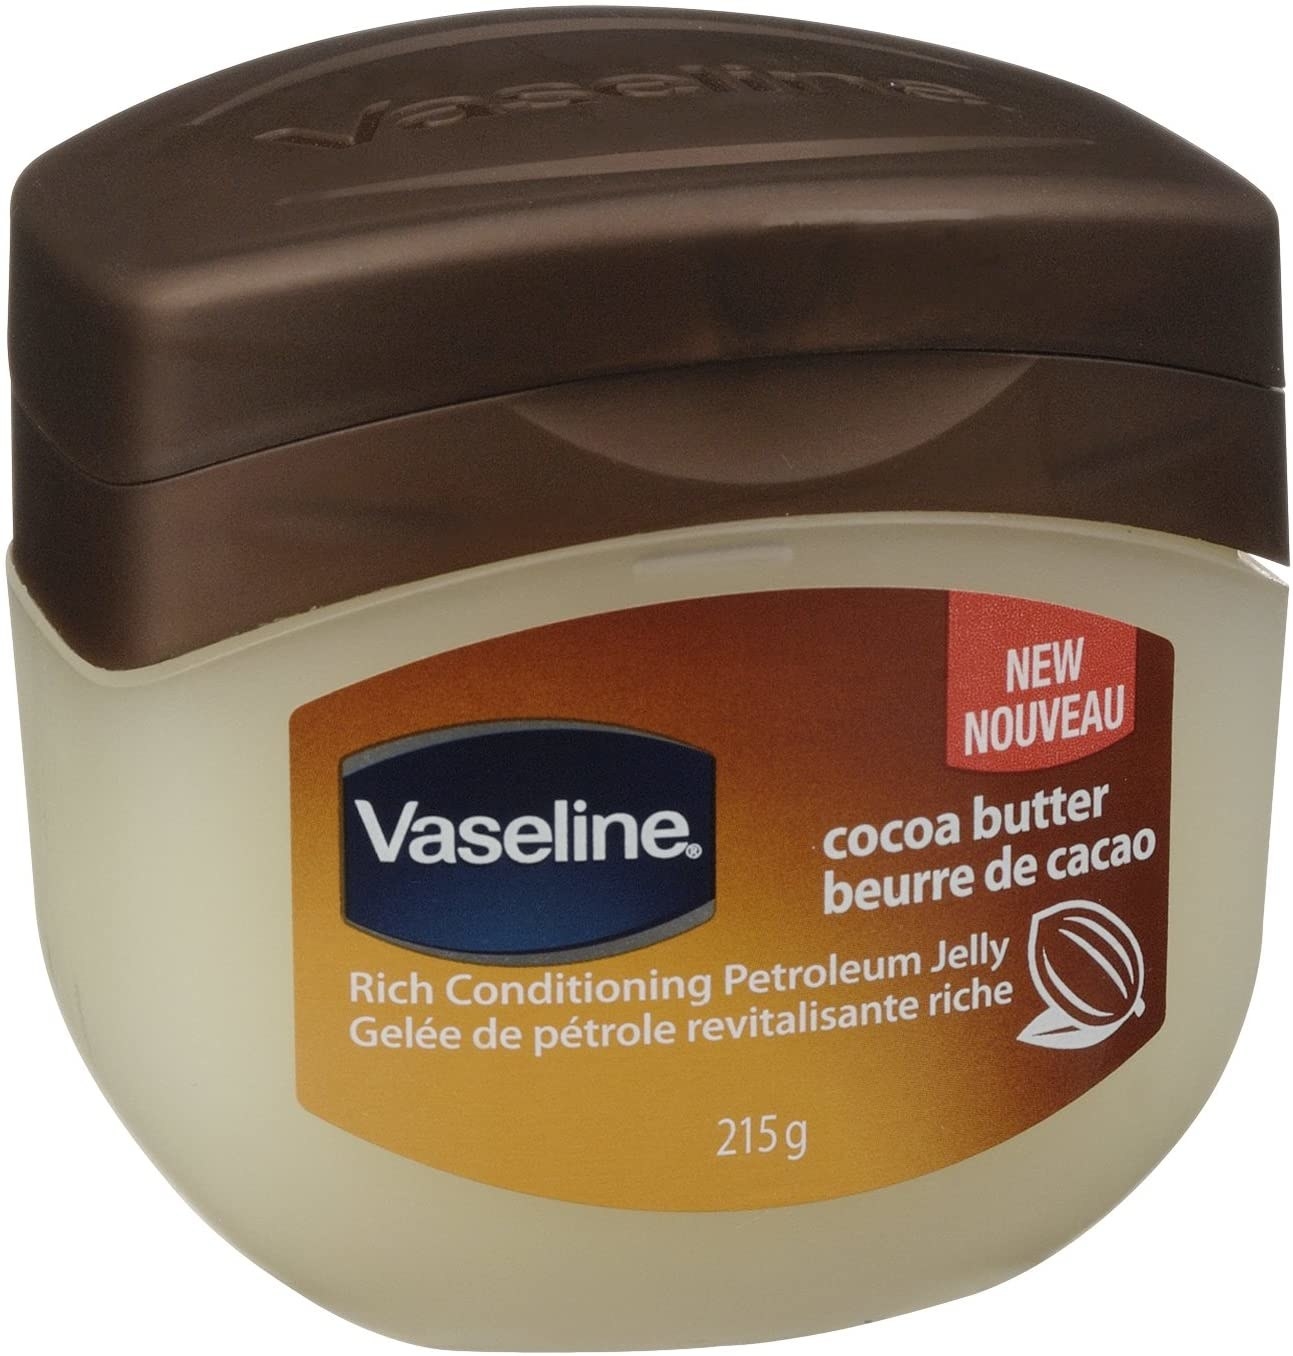 The tub of cocoa butter vaseline on a blank background